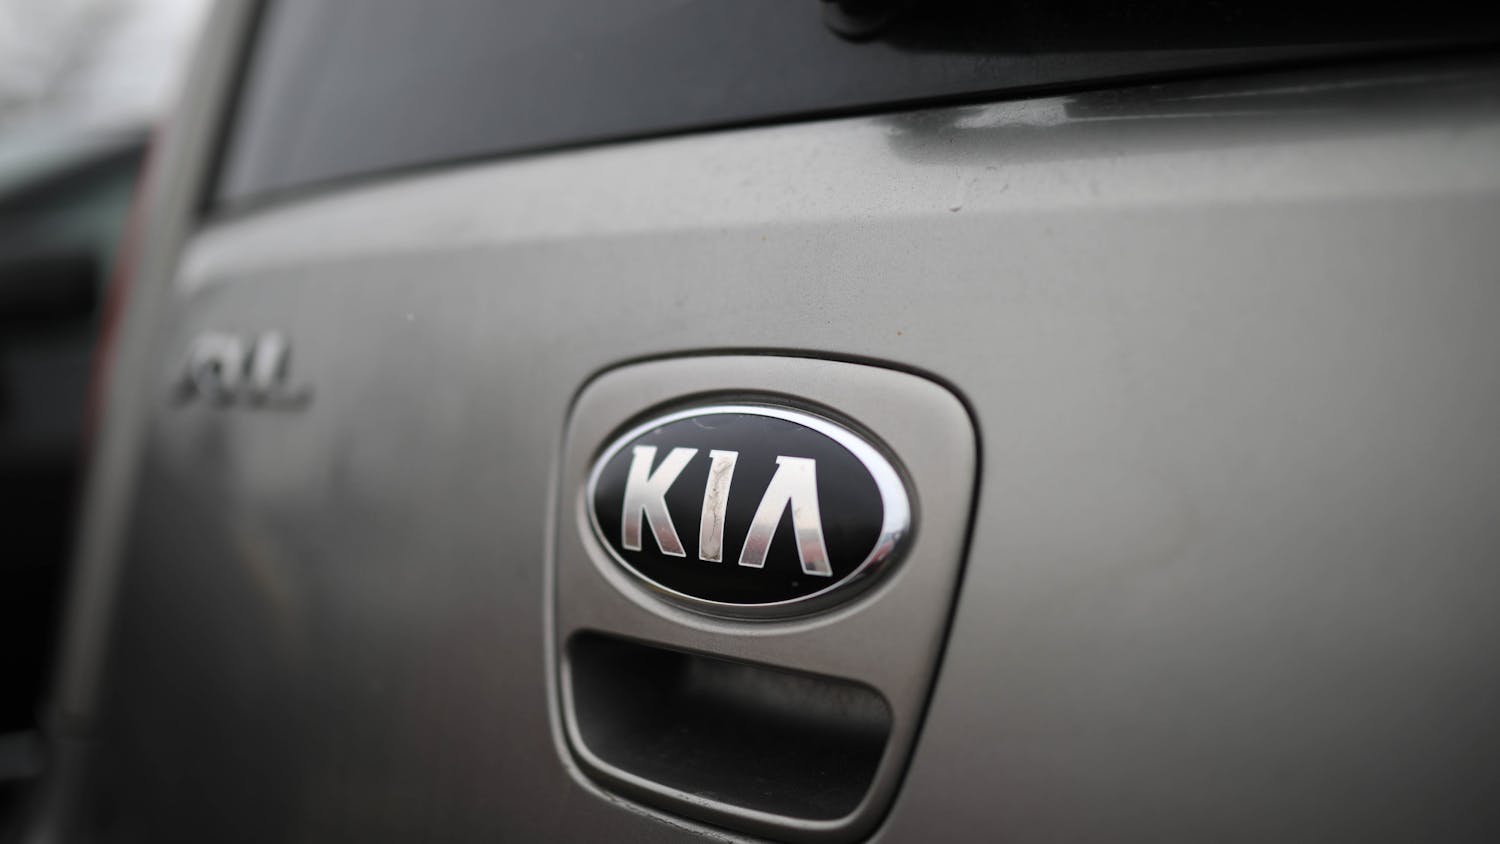 Hyundai and Kia owners on campus are being advised to take extra security precautions when locking their vehicles.